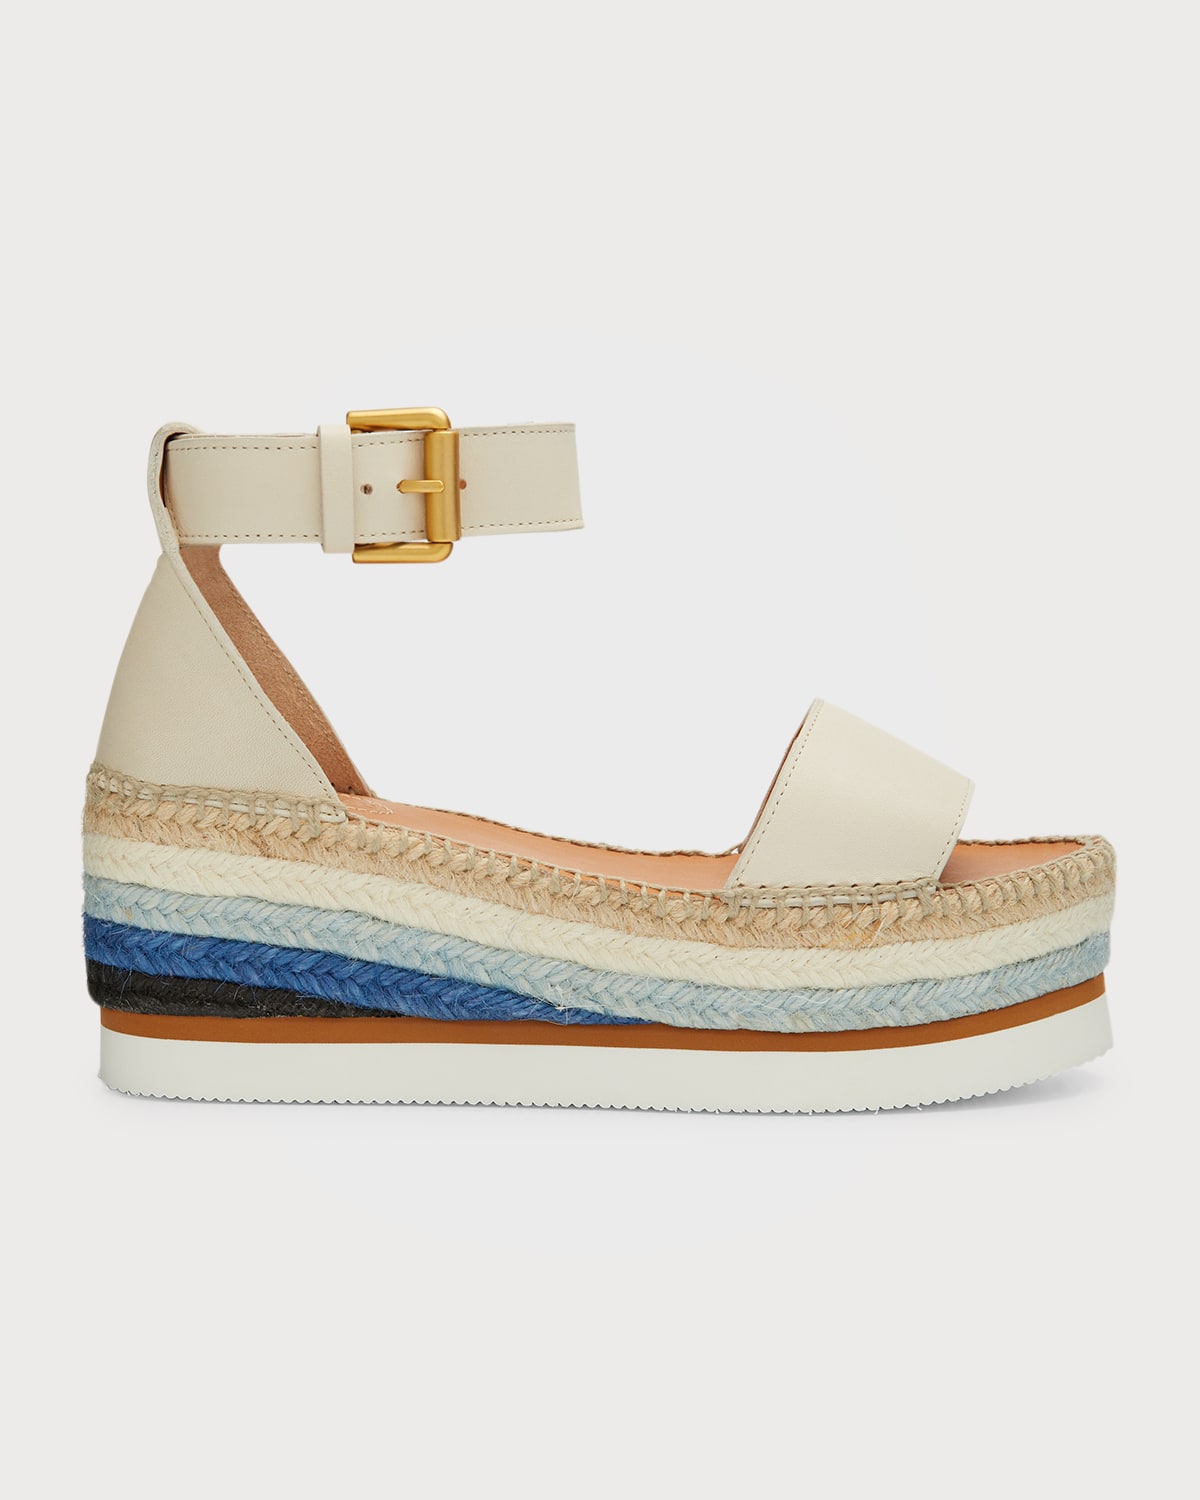 SEE BY CHLOÉ GLYN COLORBLOCK WEDGE ESPADRILLE SANDALS